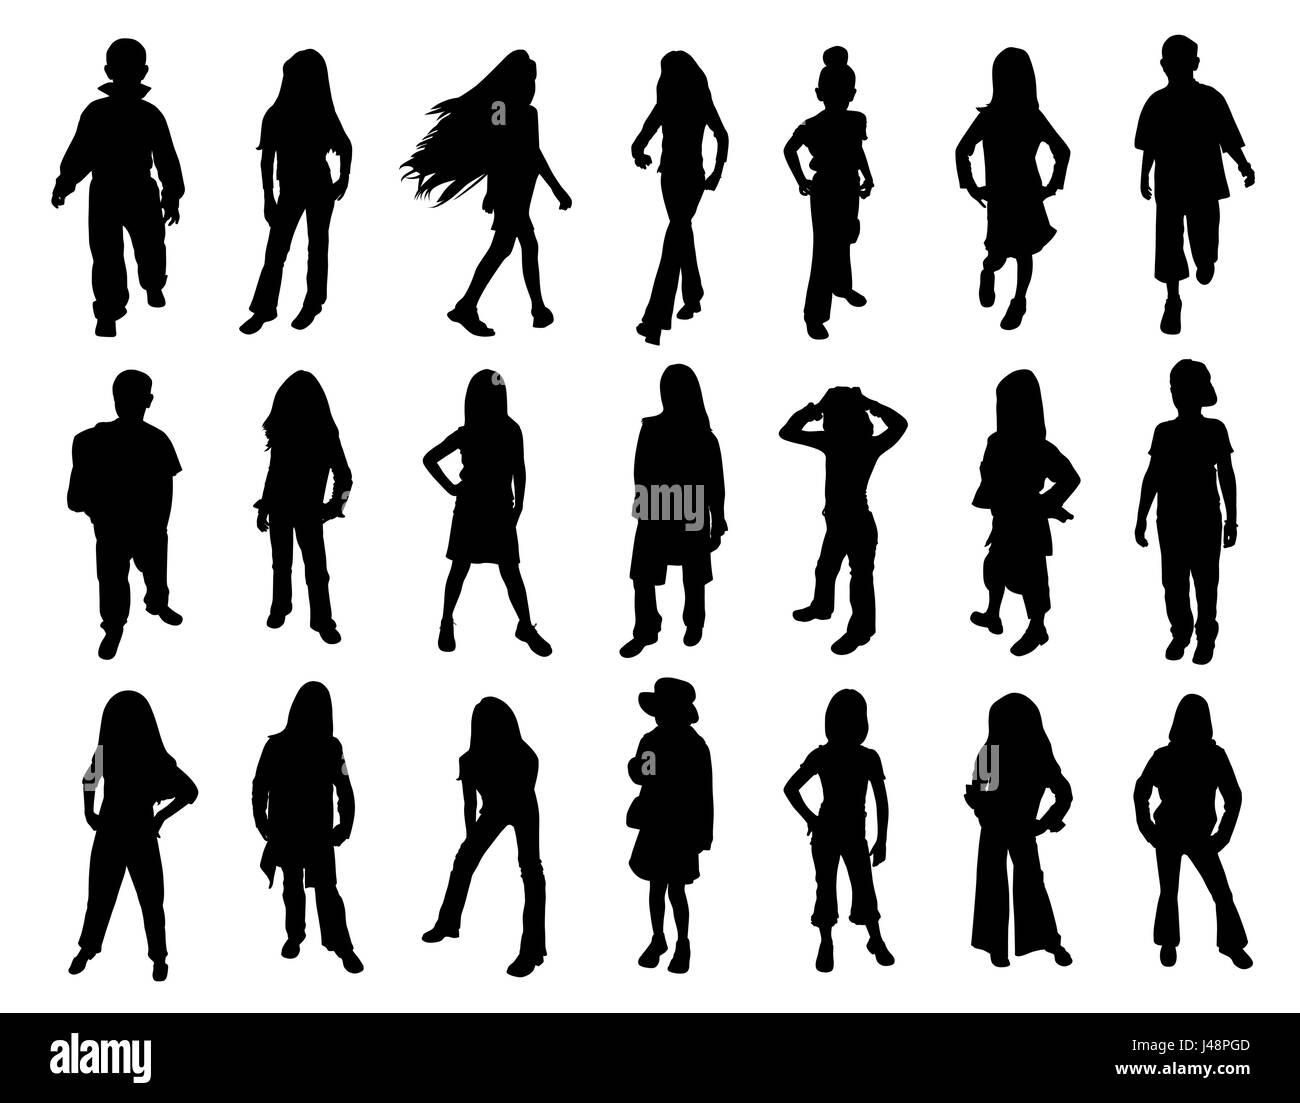 Kids models at fashion show. Twenty one silhouettes. Stock Vector